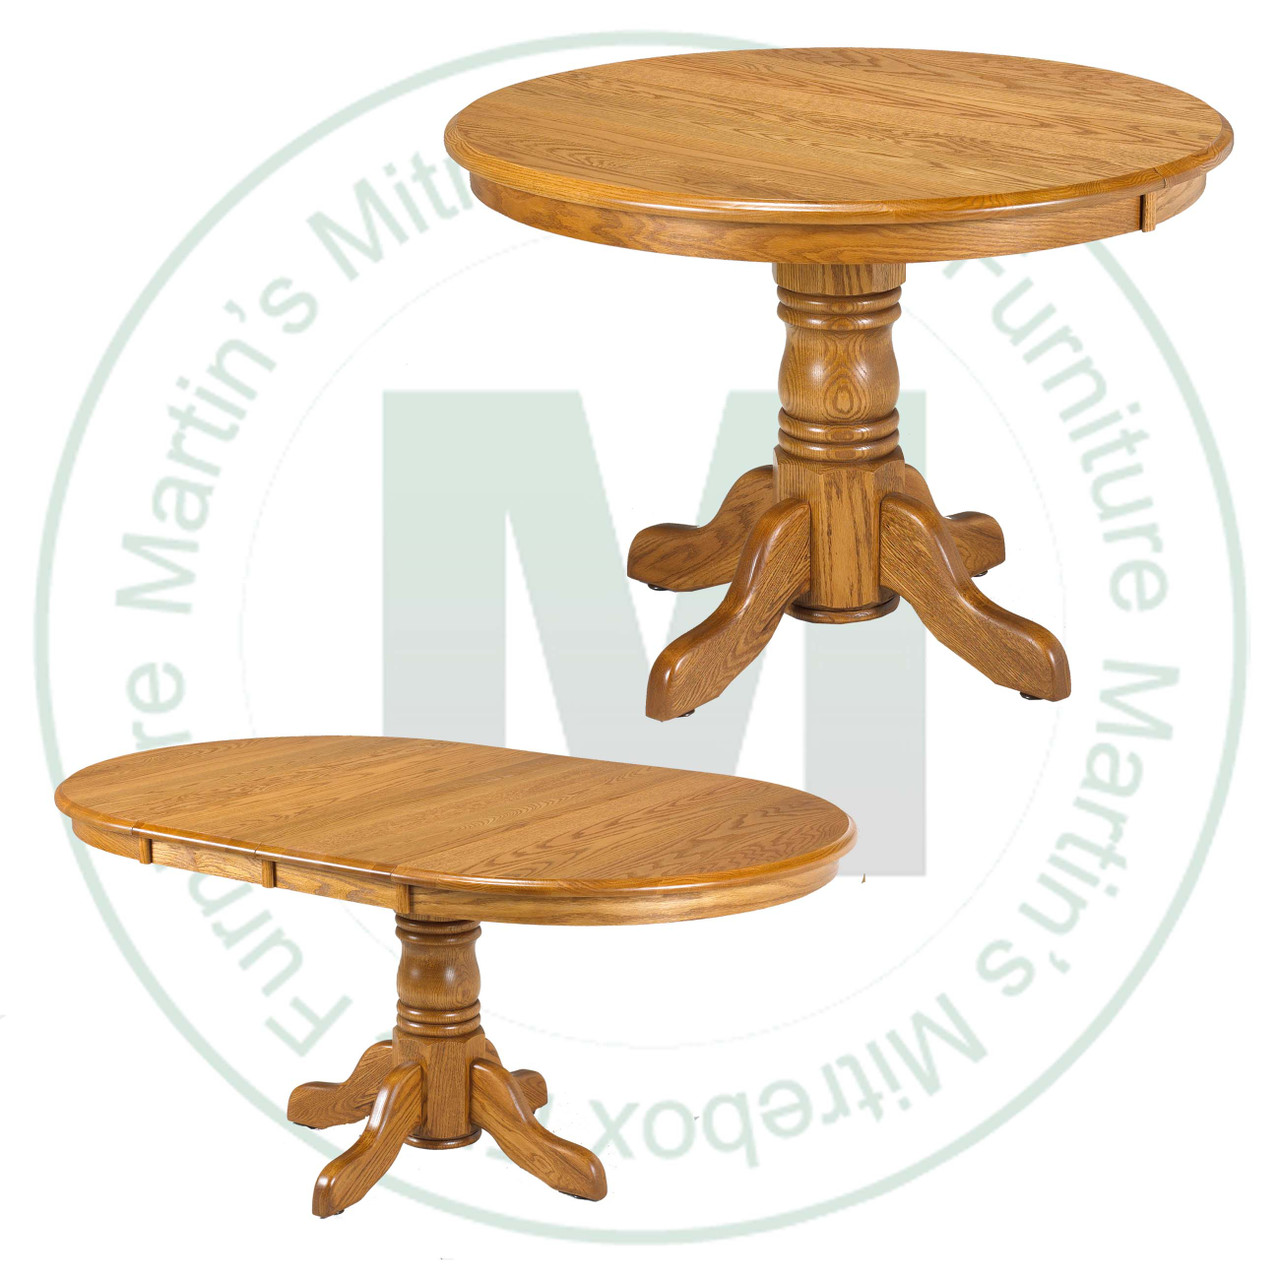 Oak Lancaster Collection Single Pedestal Table 42''D x 48''W x 30''H With 2 - 12'' Leaves. Table Has 1.25'' Thick Top